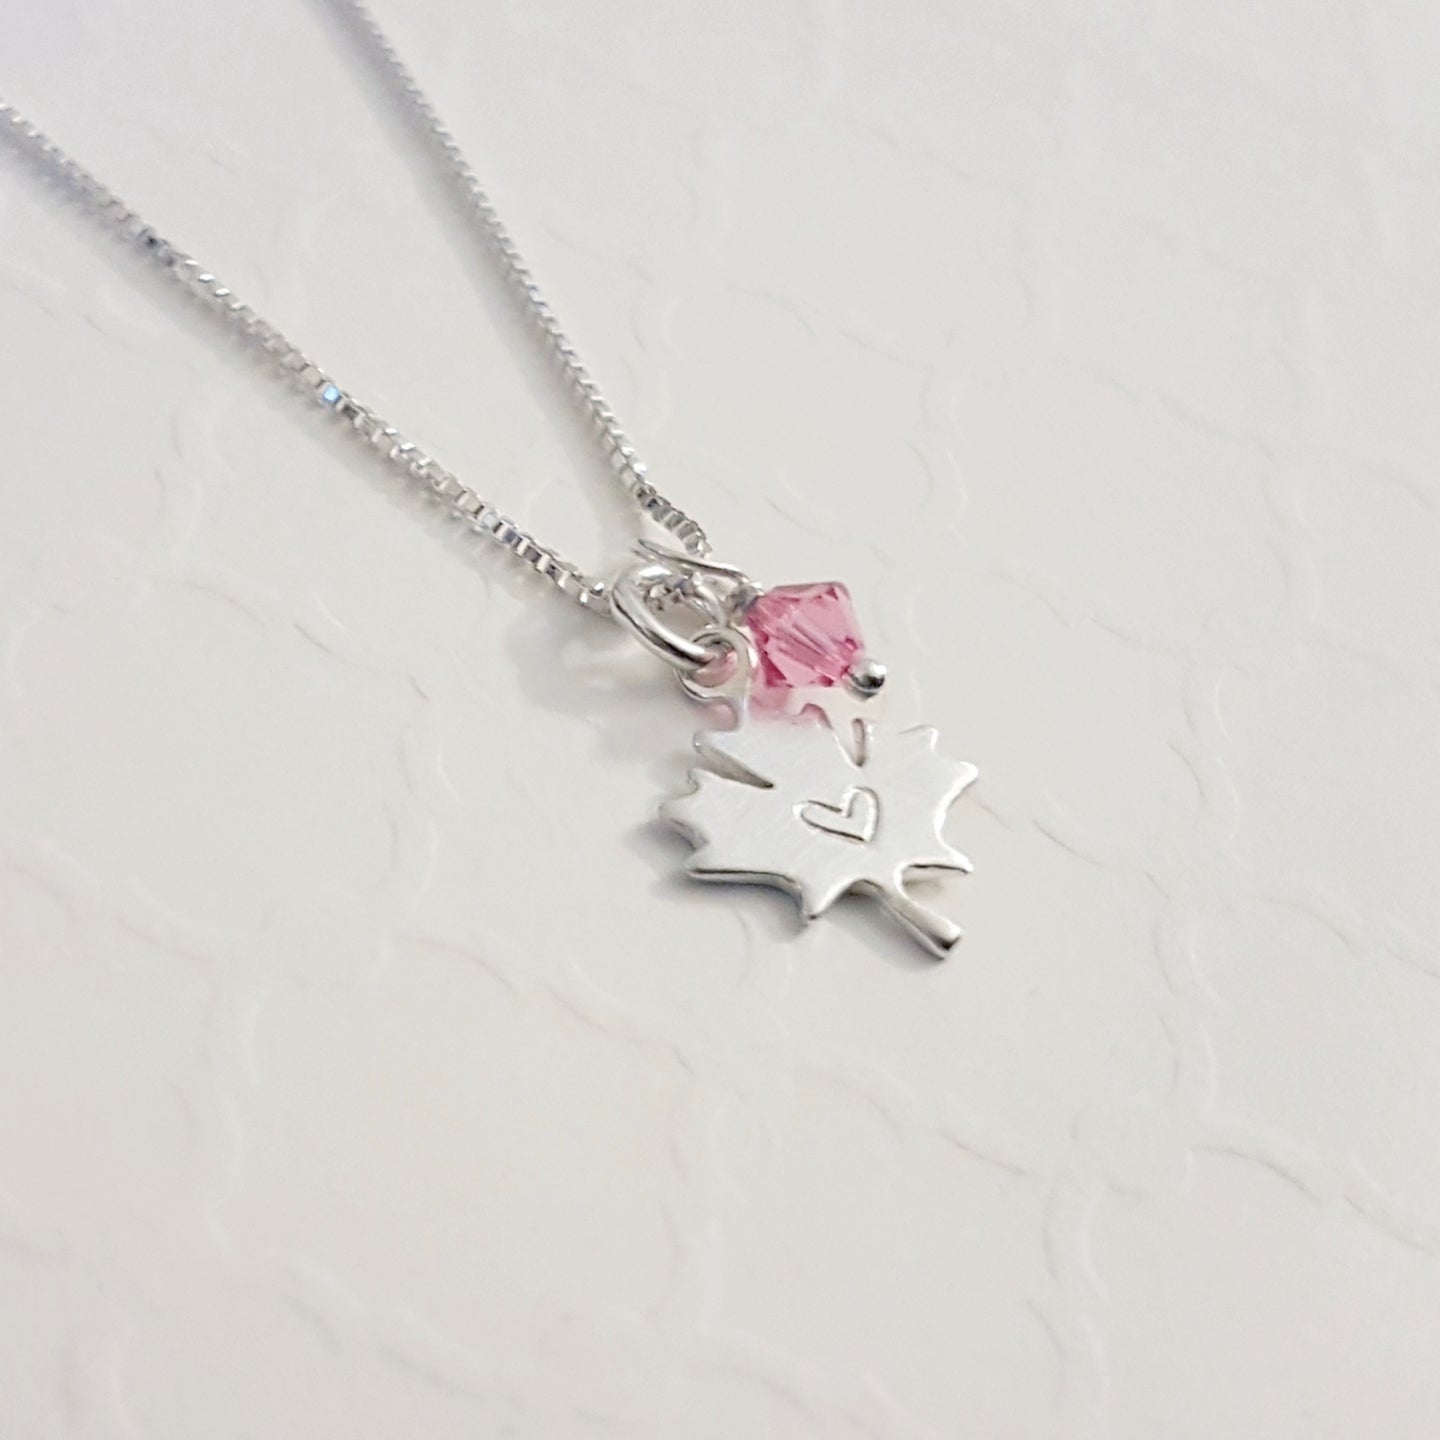 sterling silver maple leaf charm necklace stamped with tiny heart with swarovski birthstone